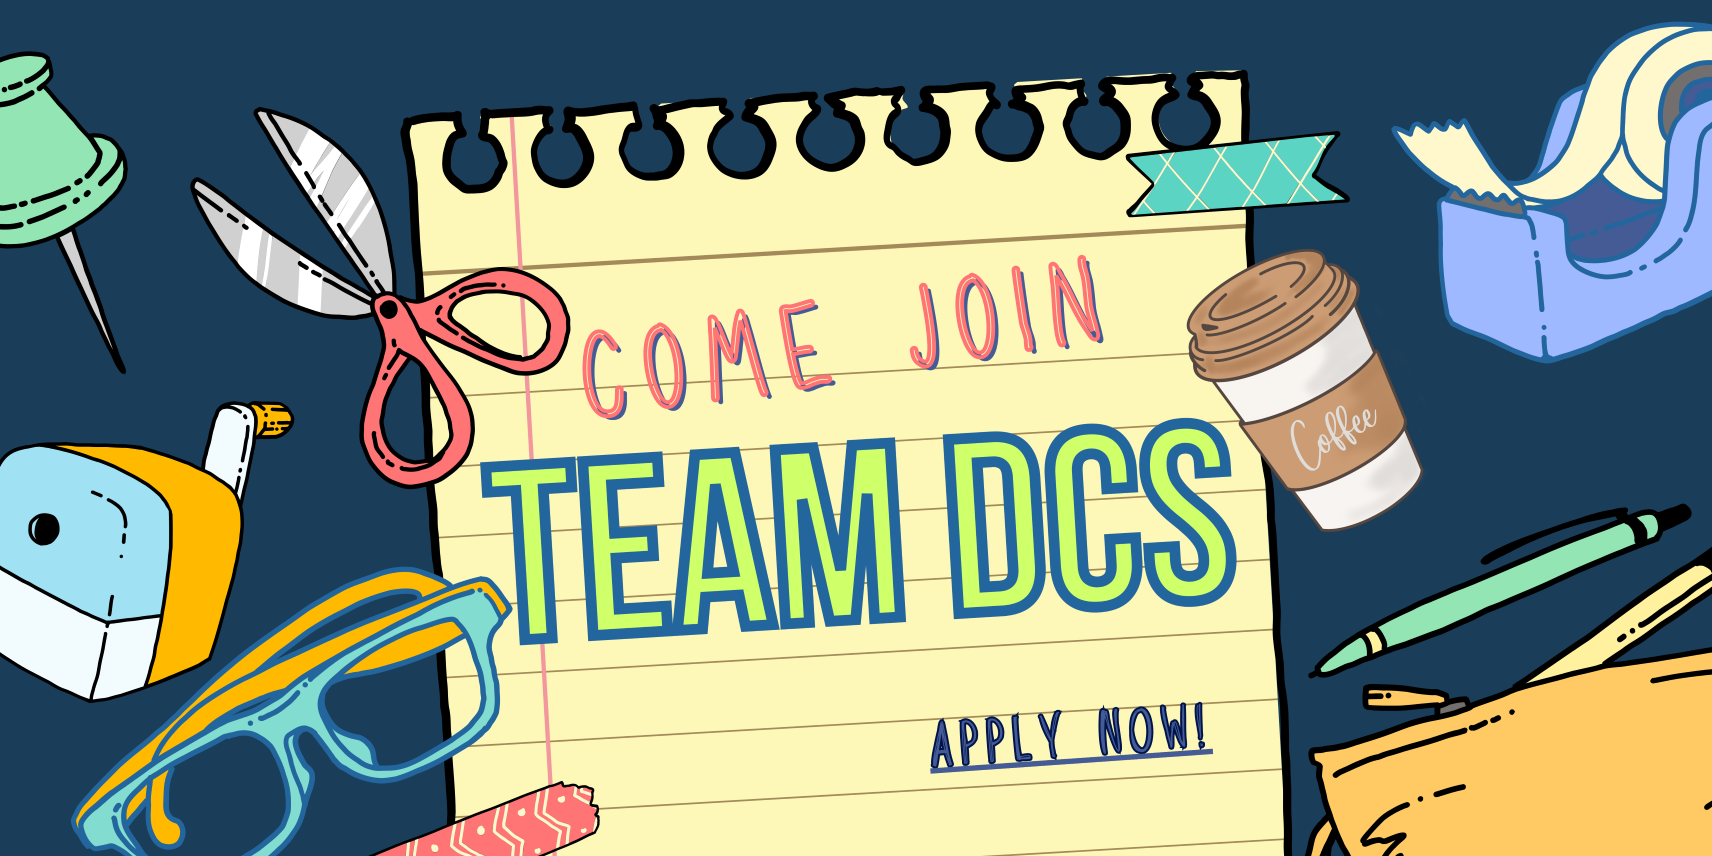 Come Join Team DCS! Apply Now